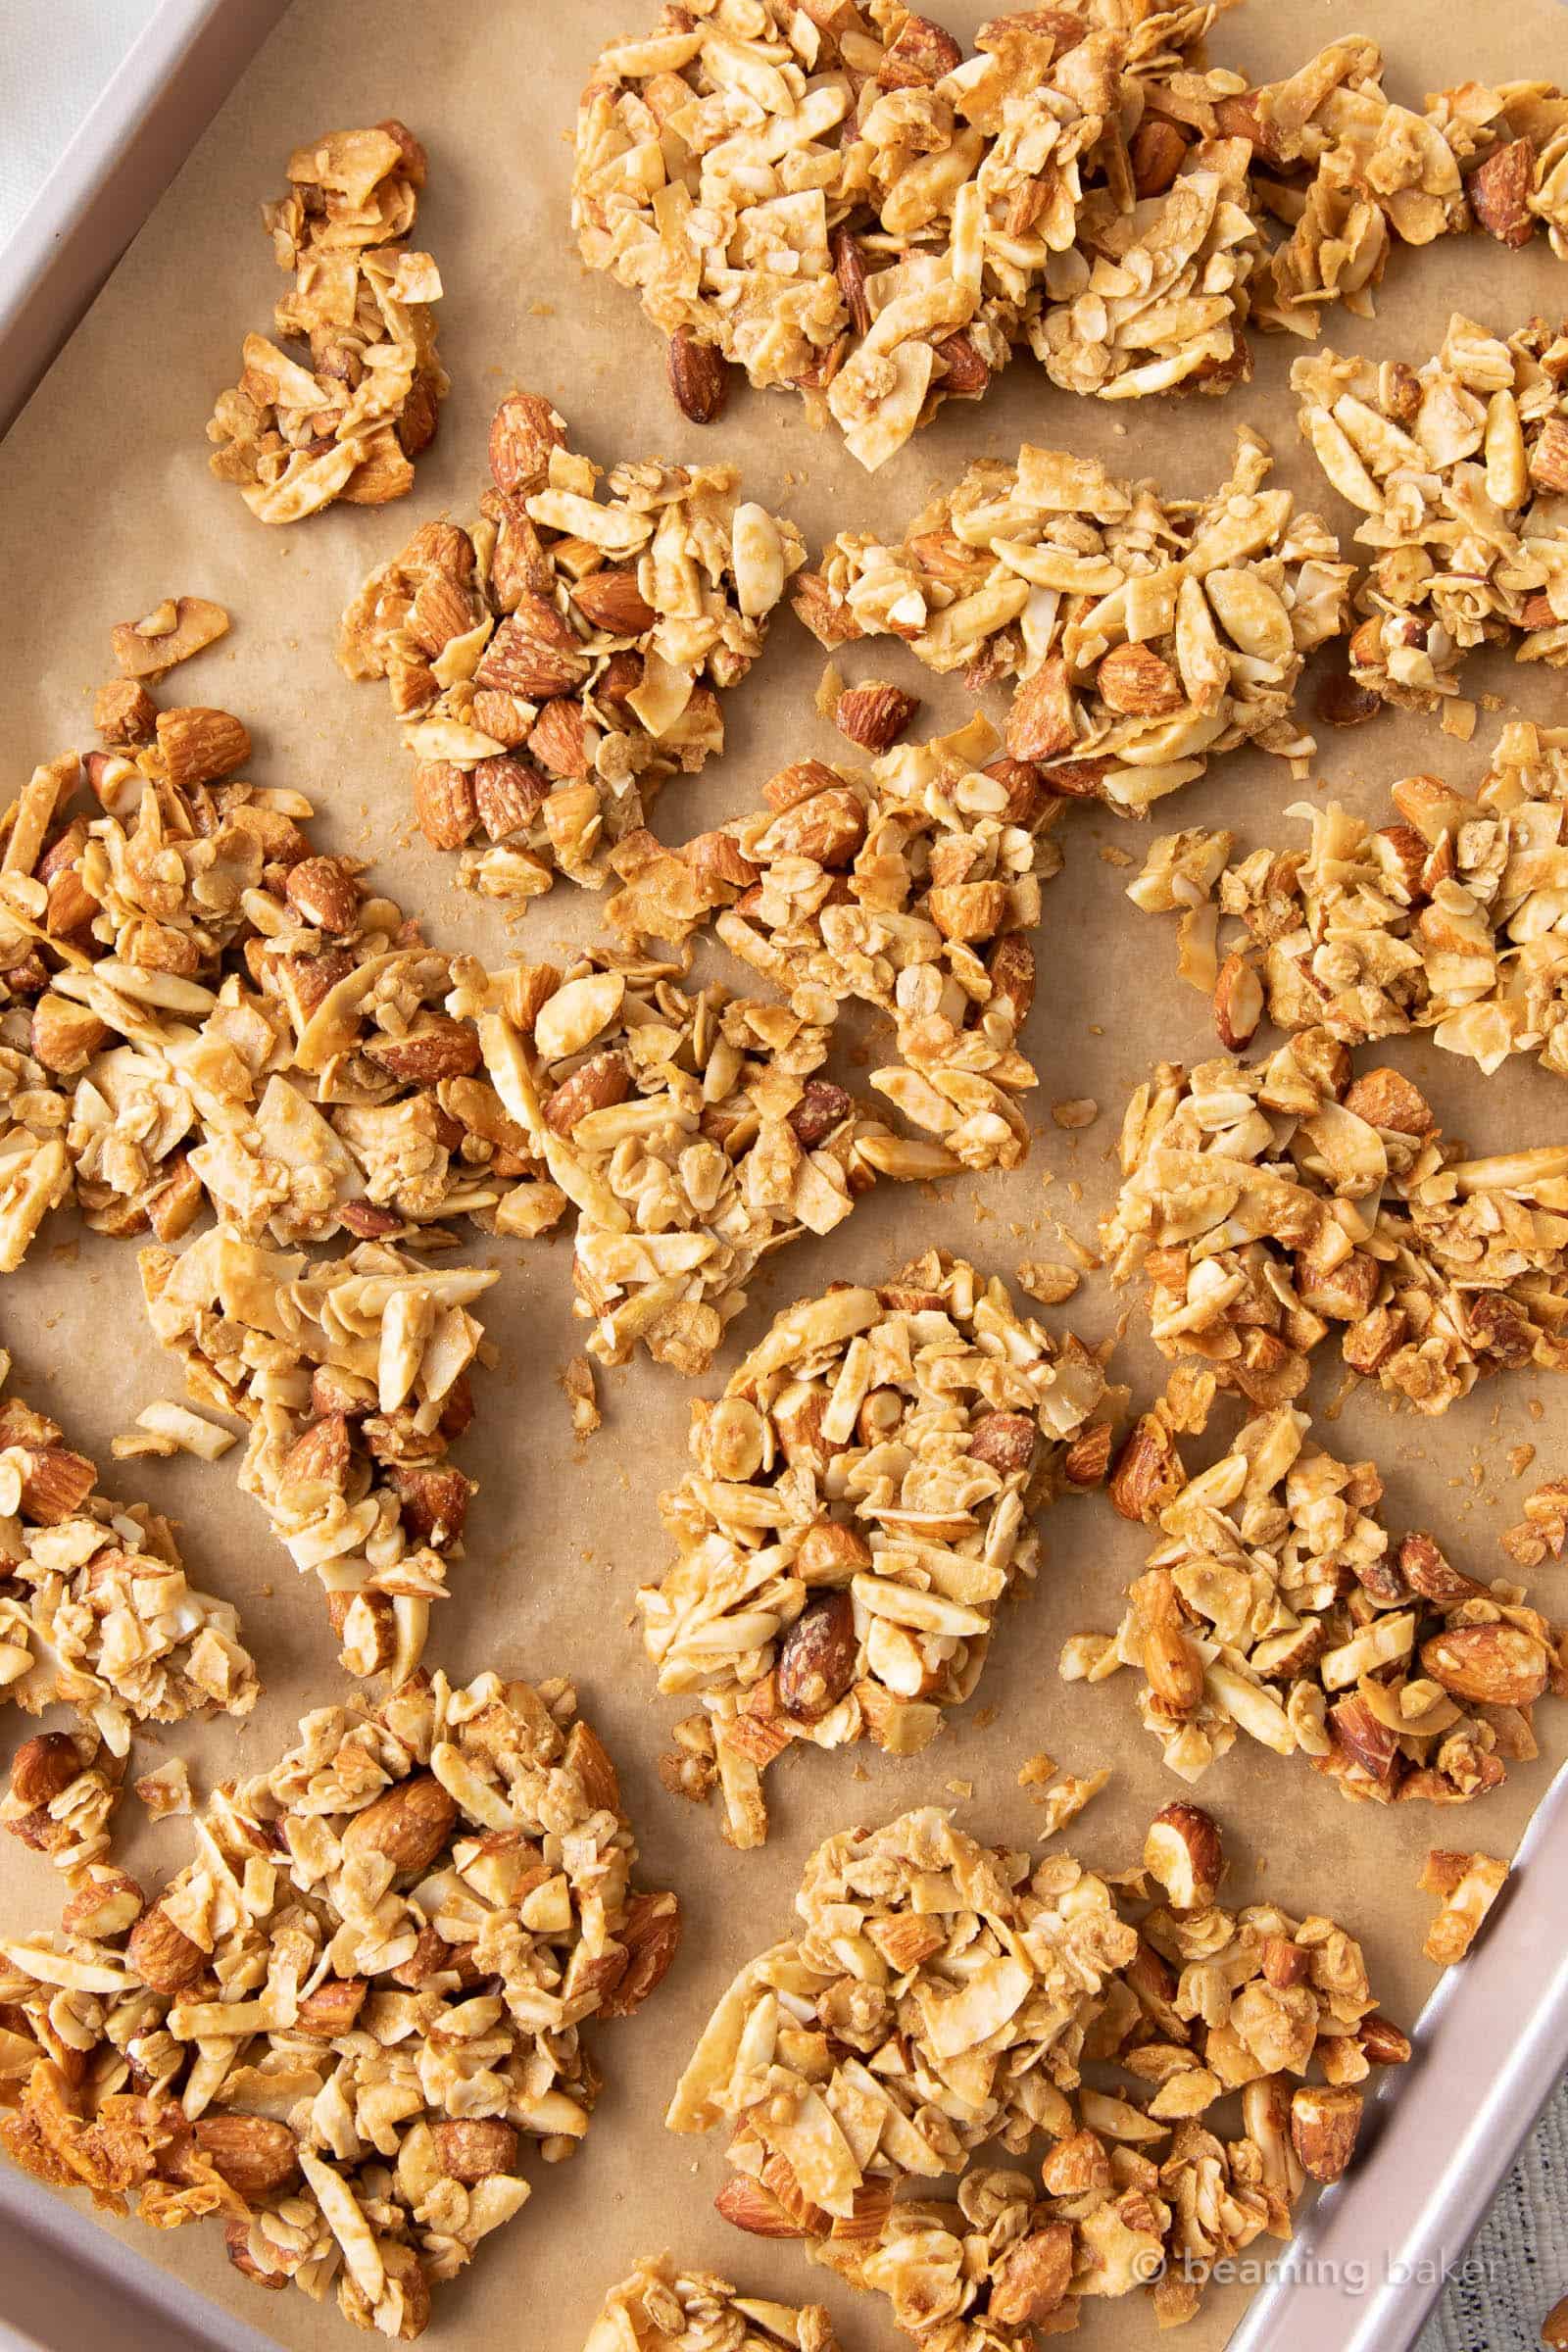 baking sheet full of large clusters for vanilla almont granola recipe